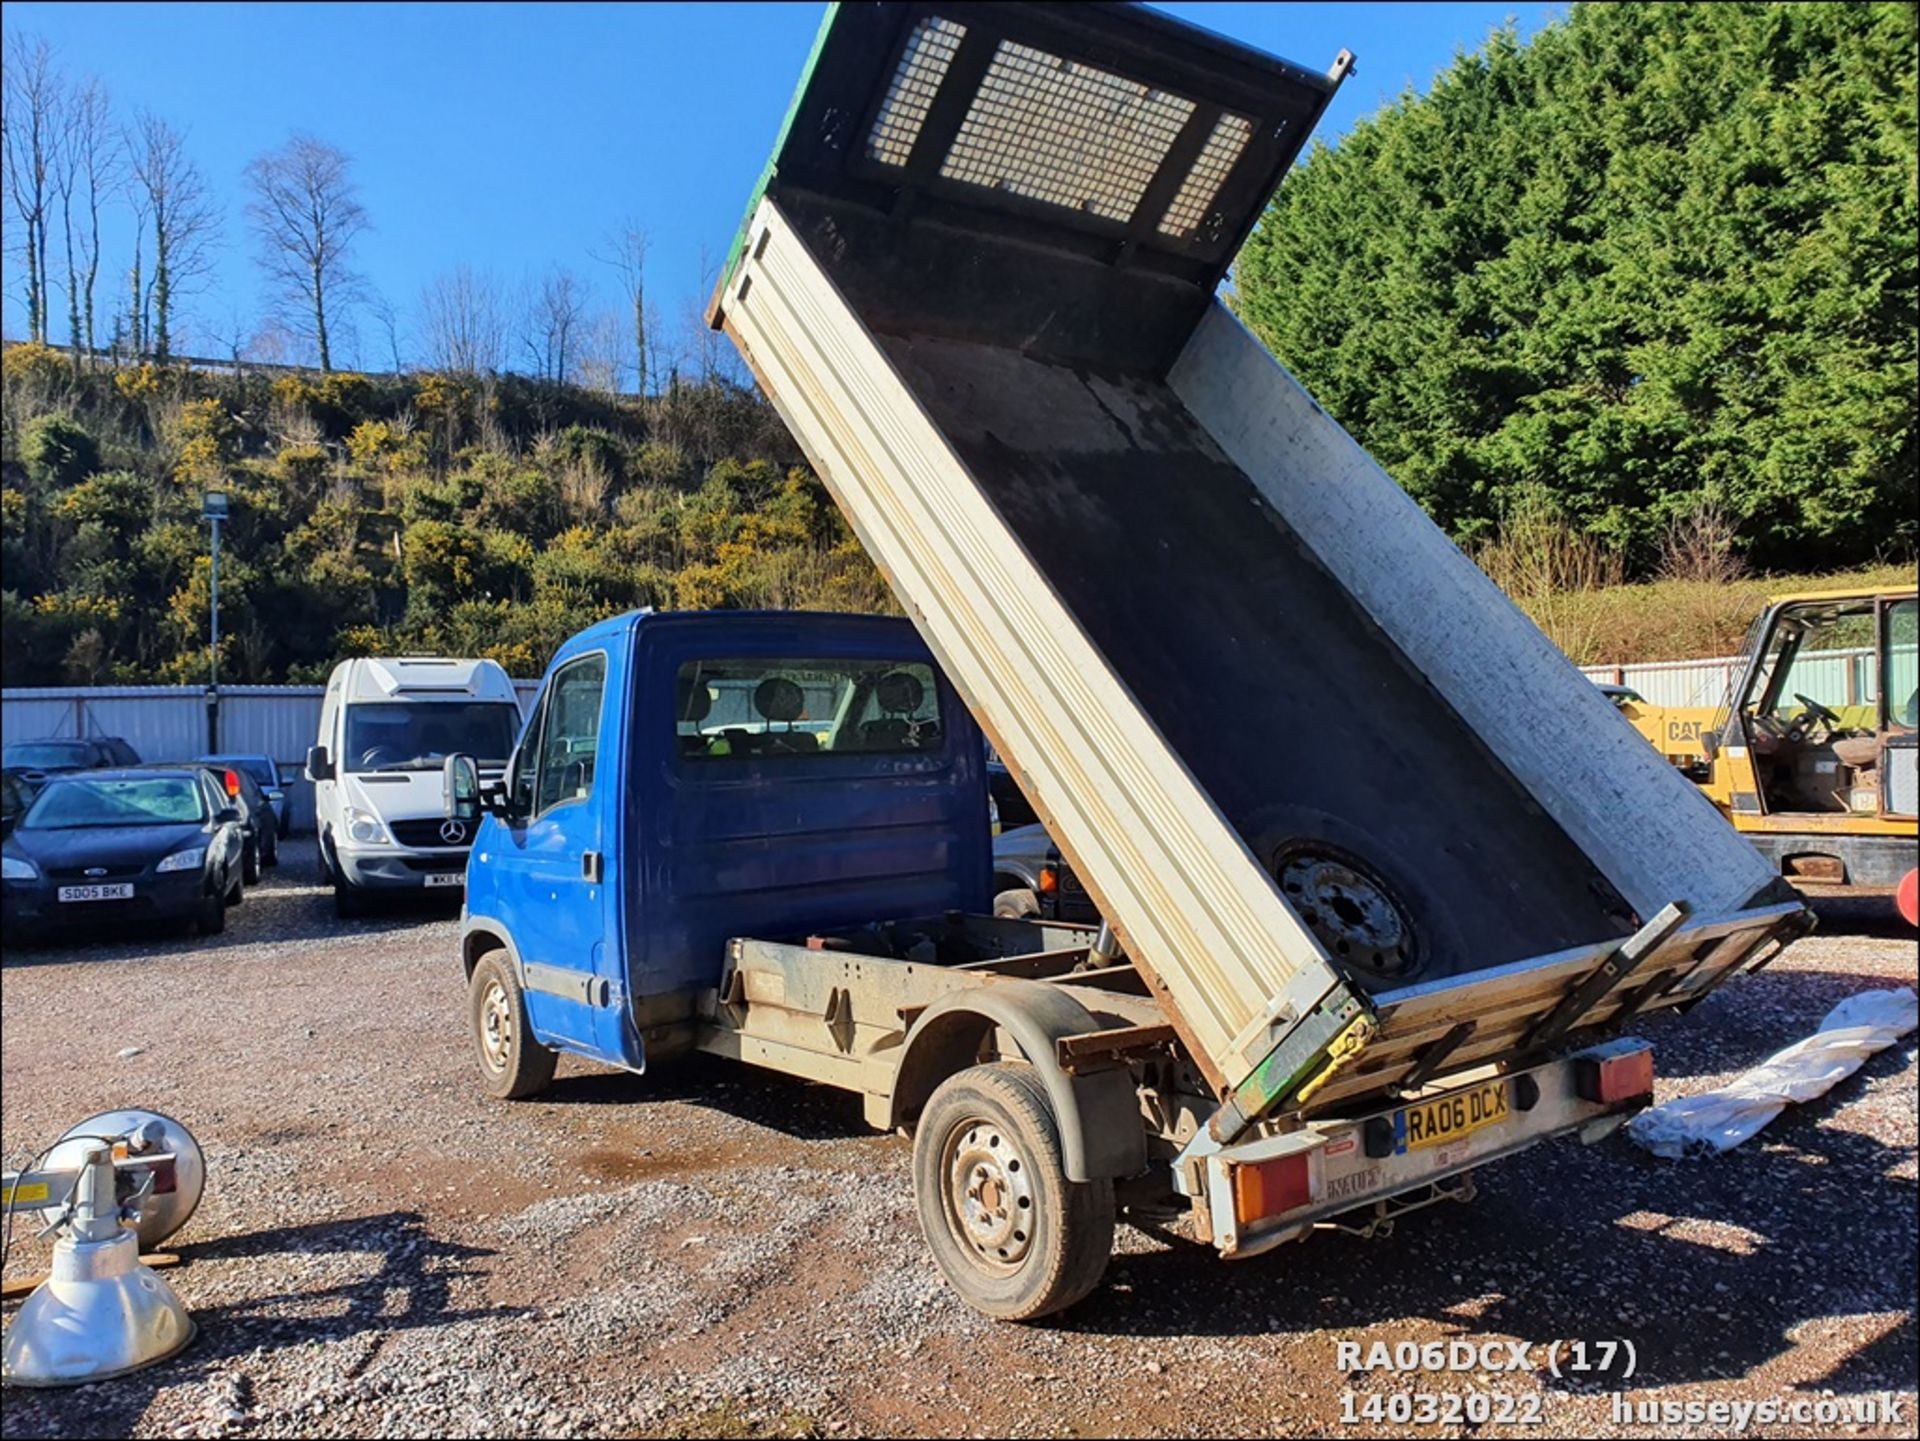 06/06 RENAULT MASTER CCML35 DCI 120 MWB - 2463cc 2dr Tipper (Grey) - Image 18 of 23